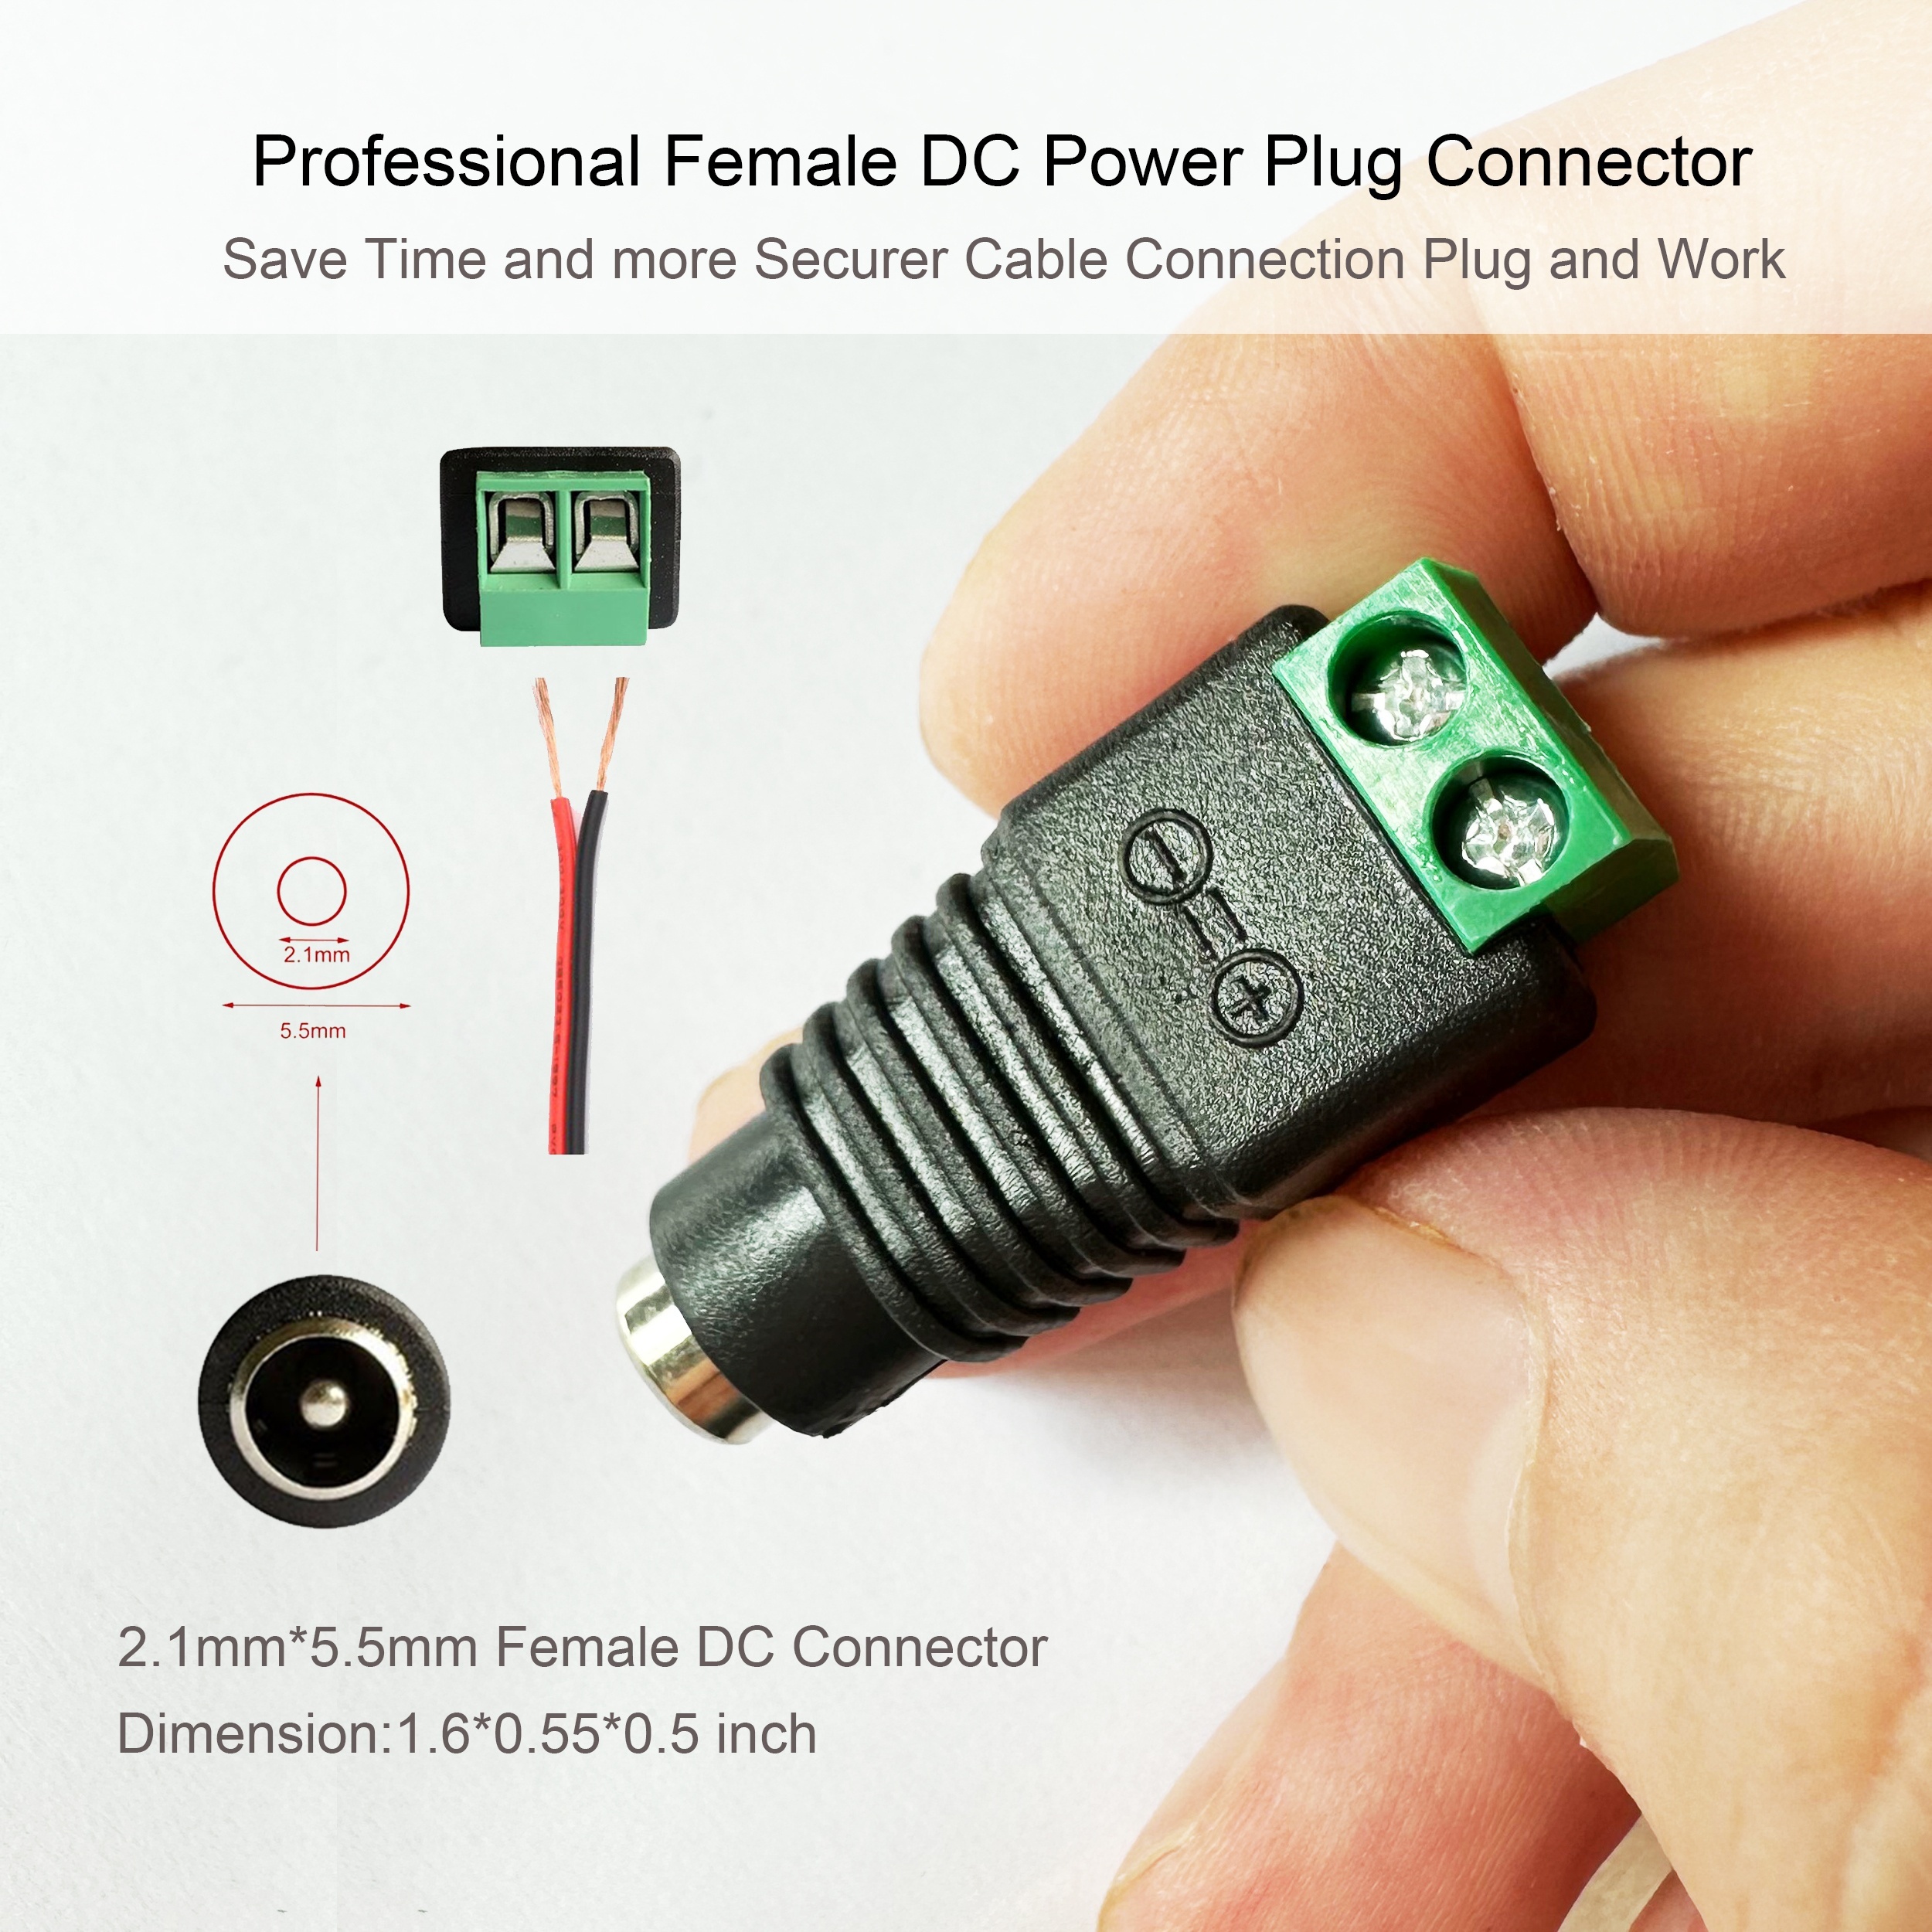 10 Pairs 12V DC Power Connector 5.5mm X 2.1mm, 10 Male + 10 Female，Power  Jack Adapter For Led Strip CCTV Security Camera Cable Wire Ends Plug